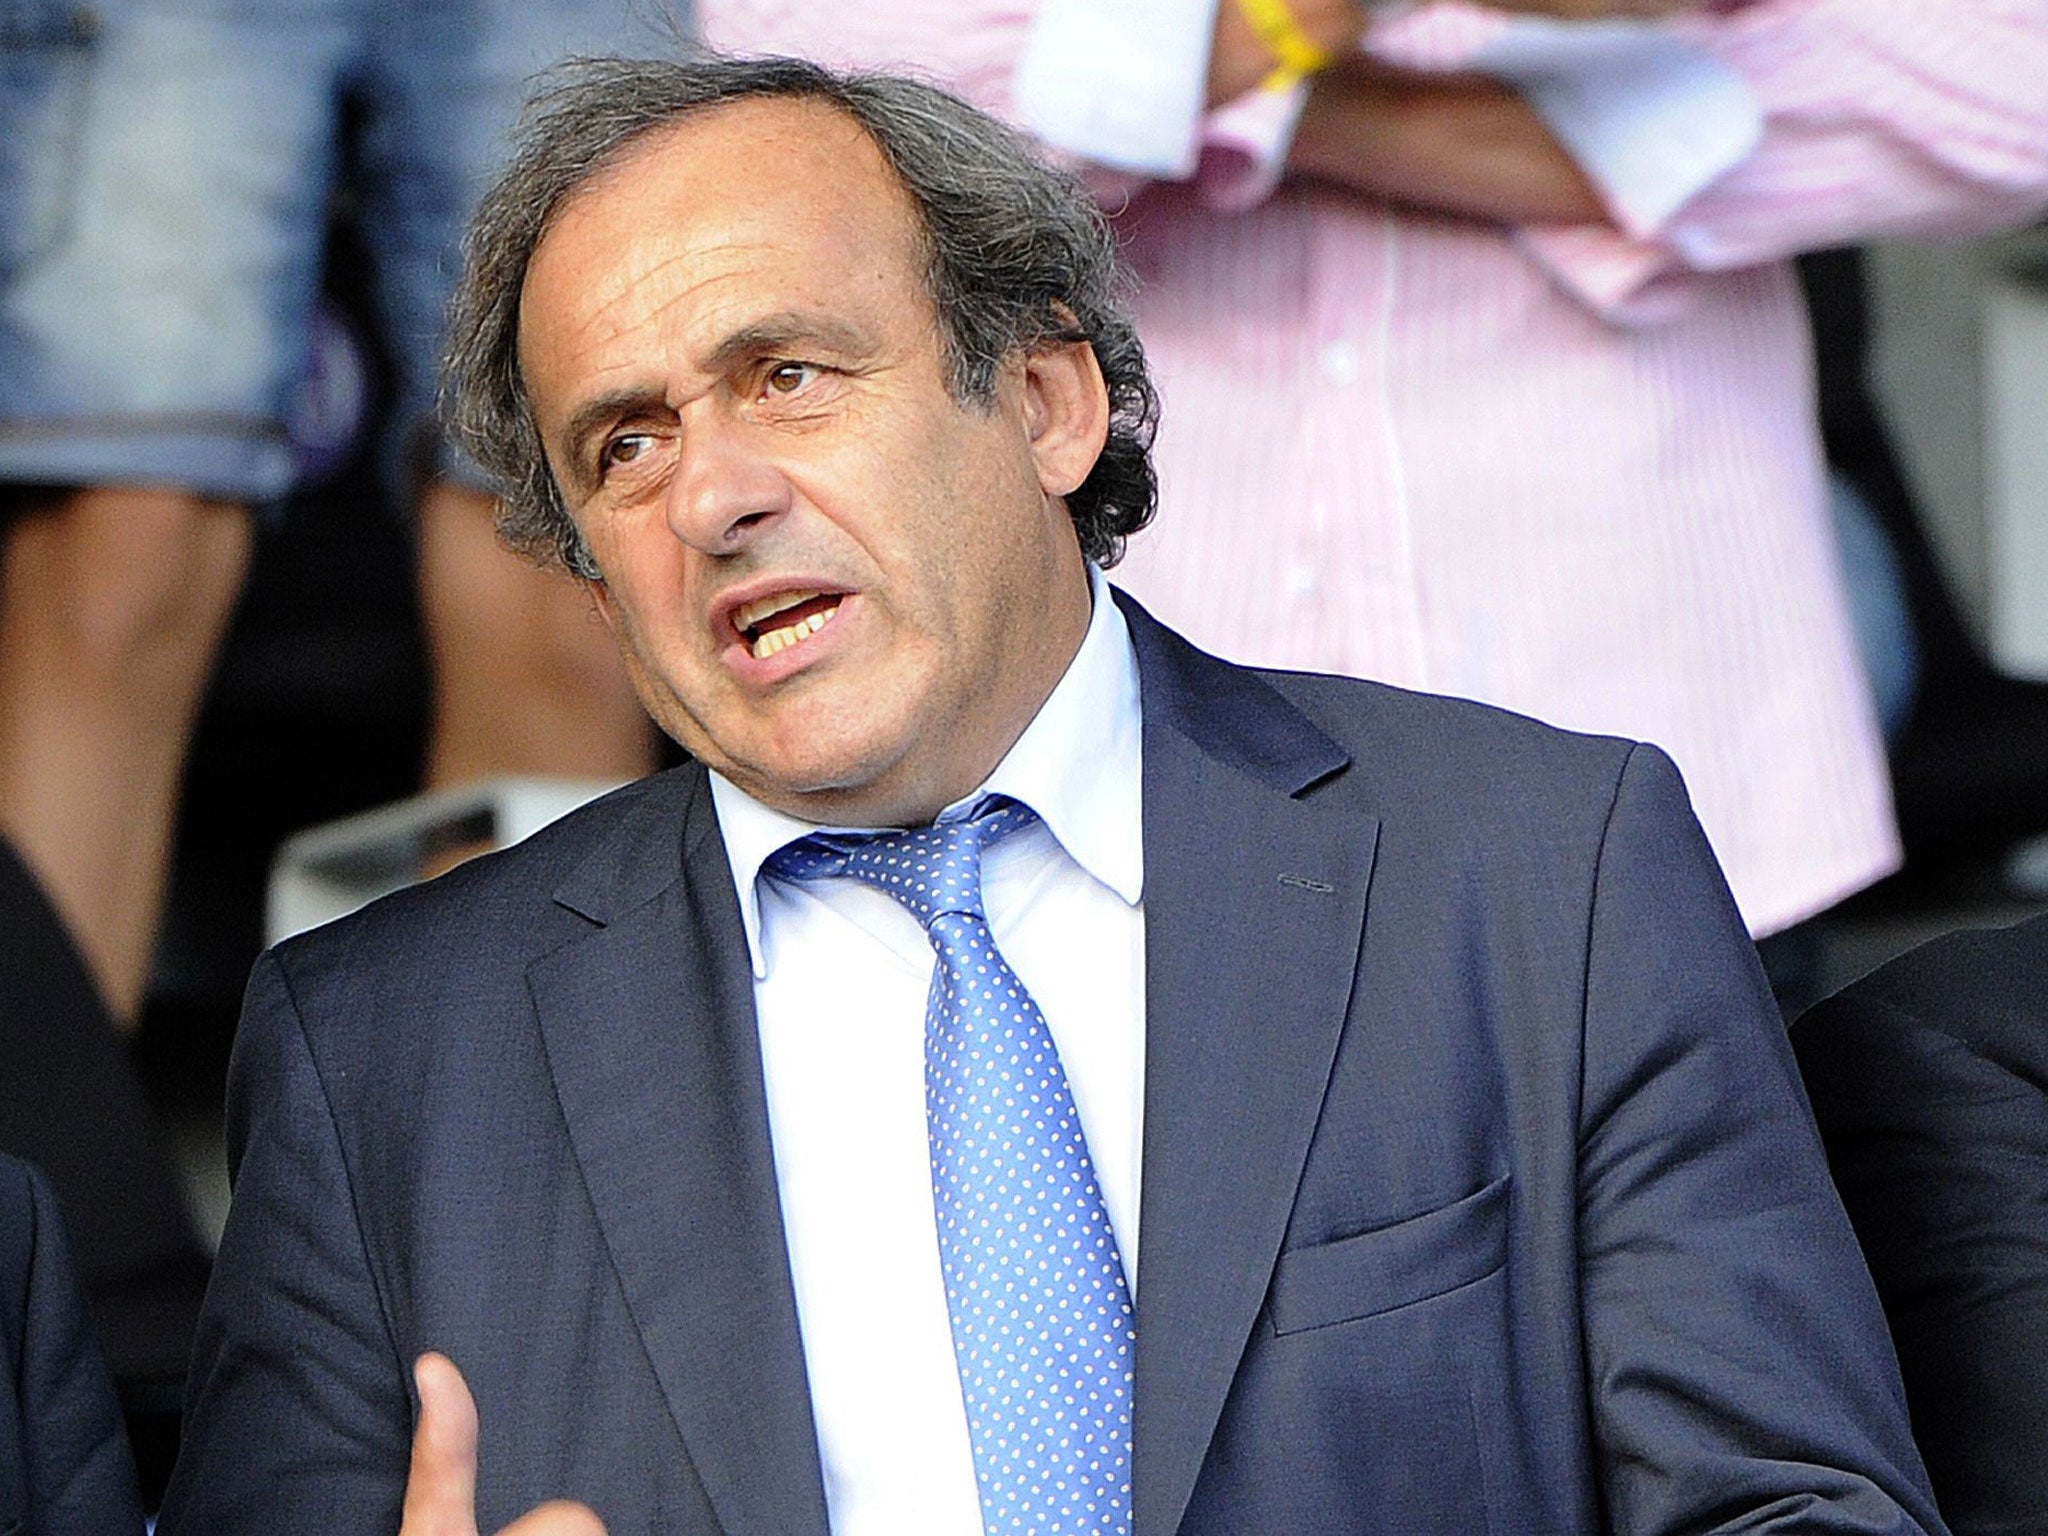 Michel Platini has long been a supporter of a Qatar World Cup